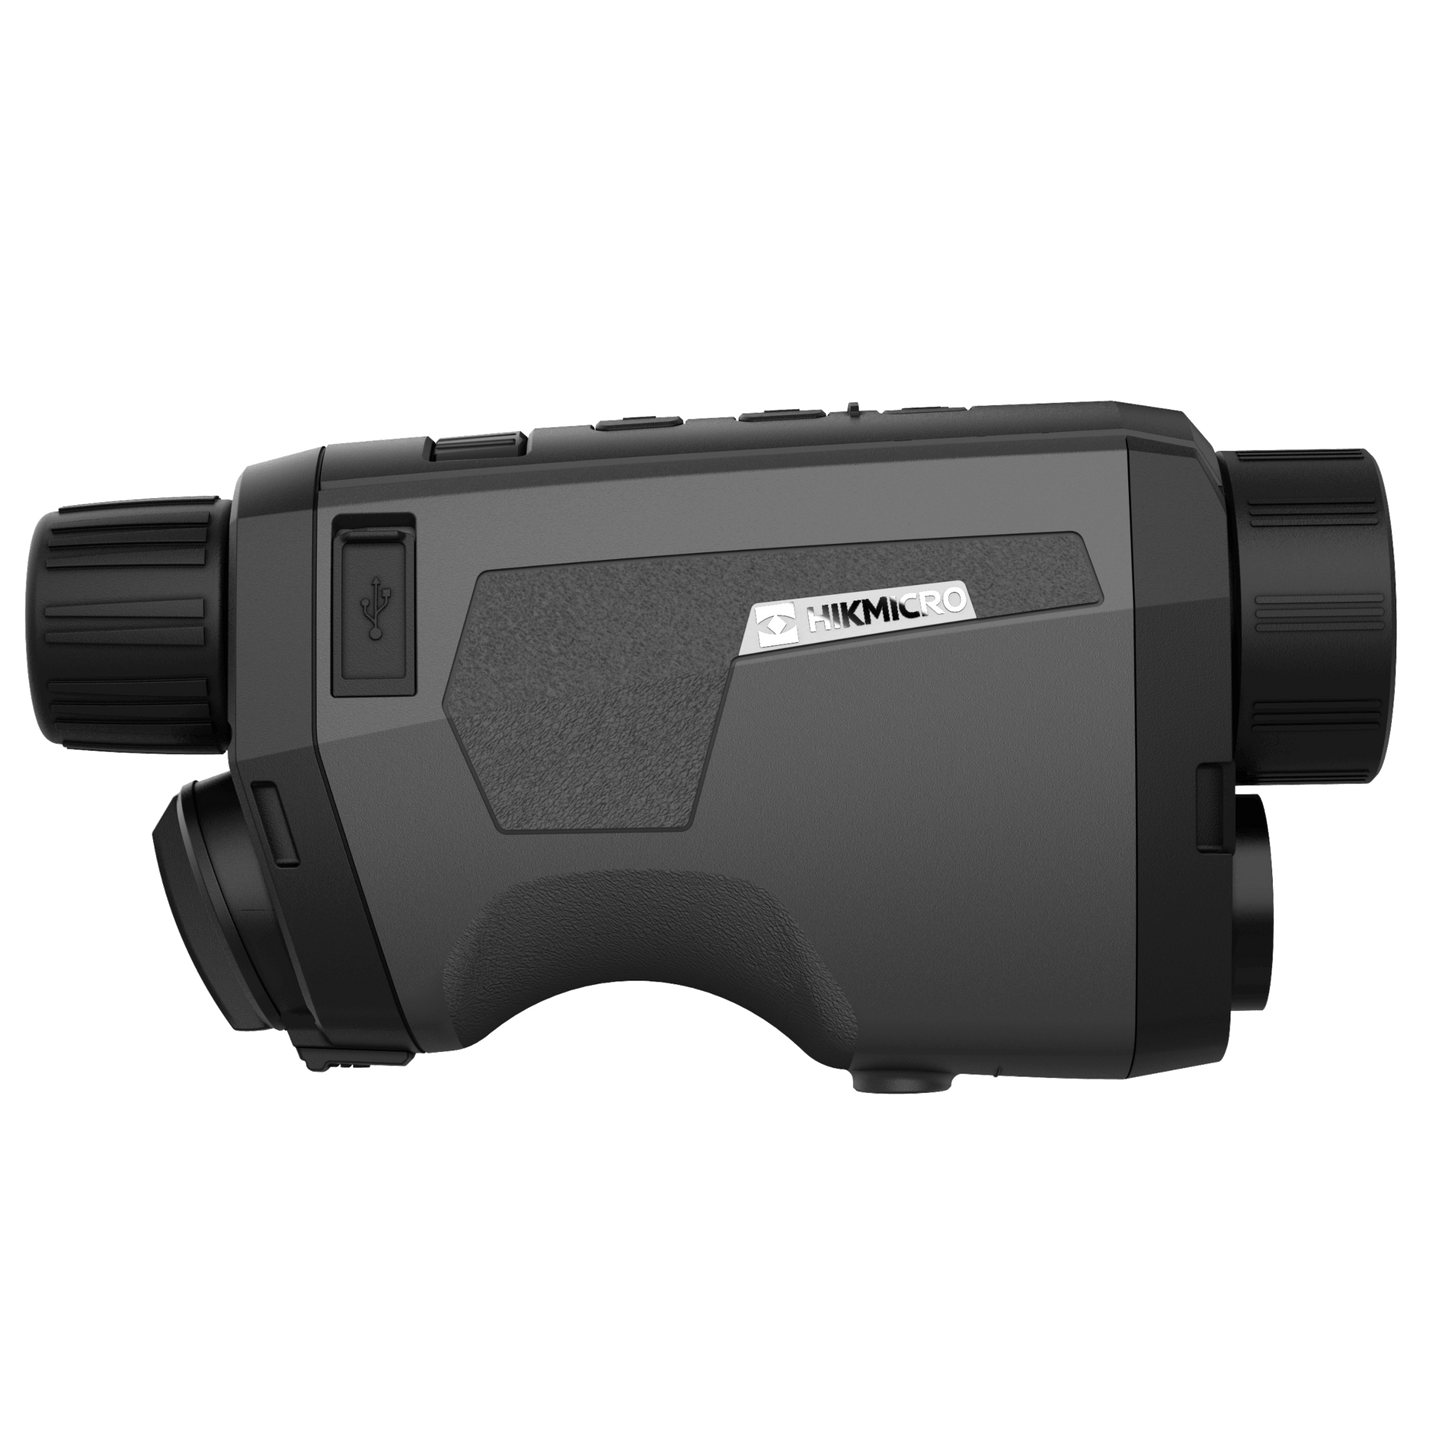 Cape Thermal imaging monocular for sale - HikMicro Gryphon GH35L Handheld thermal monocular right side view